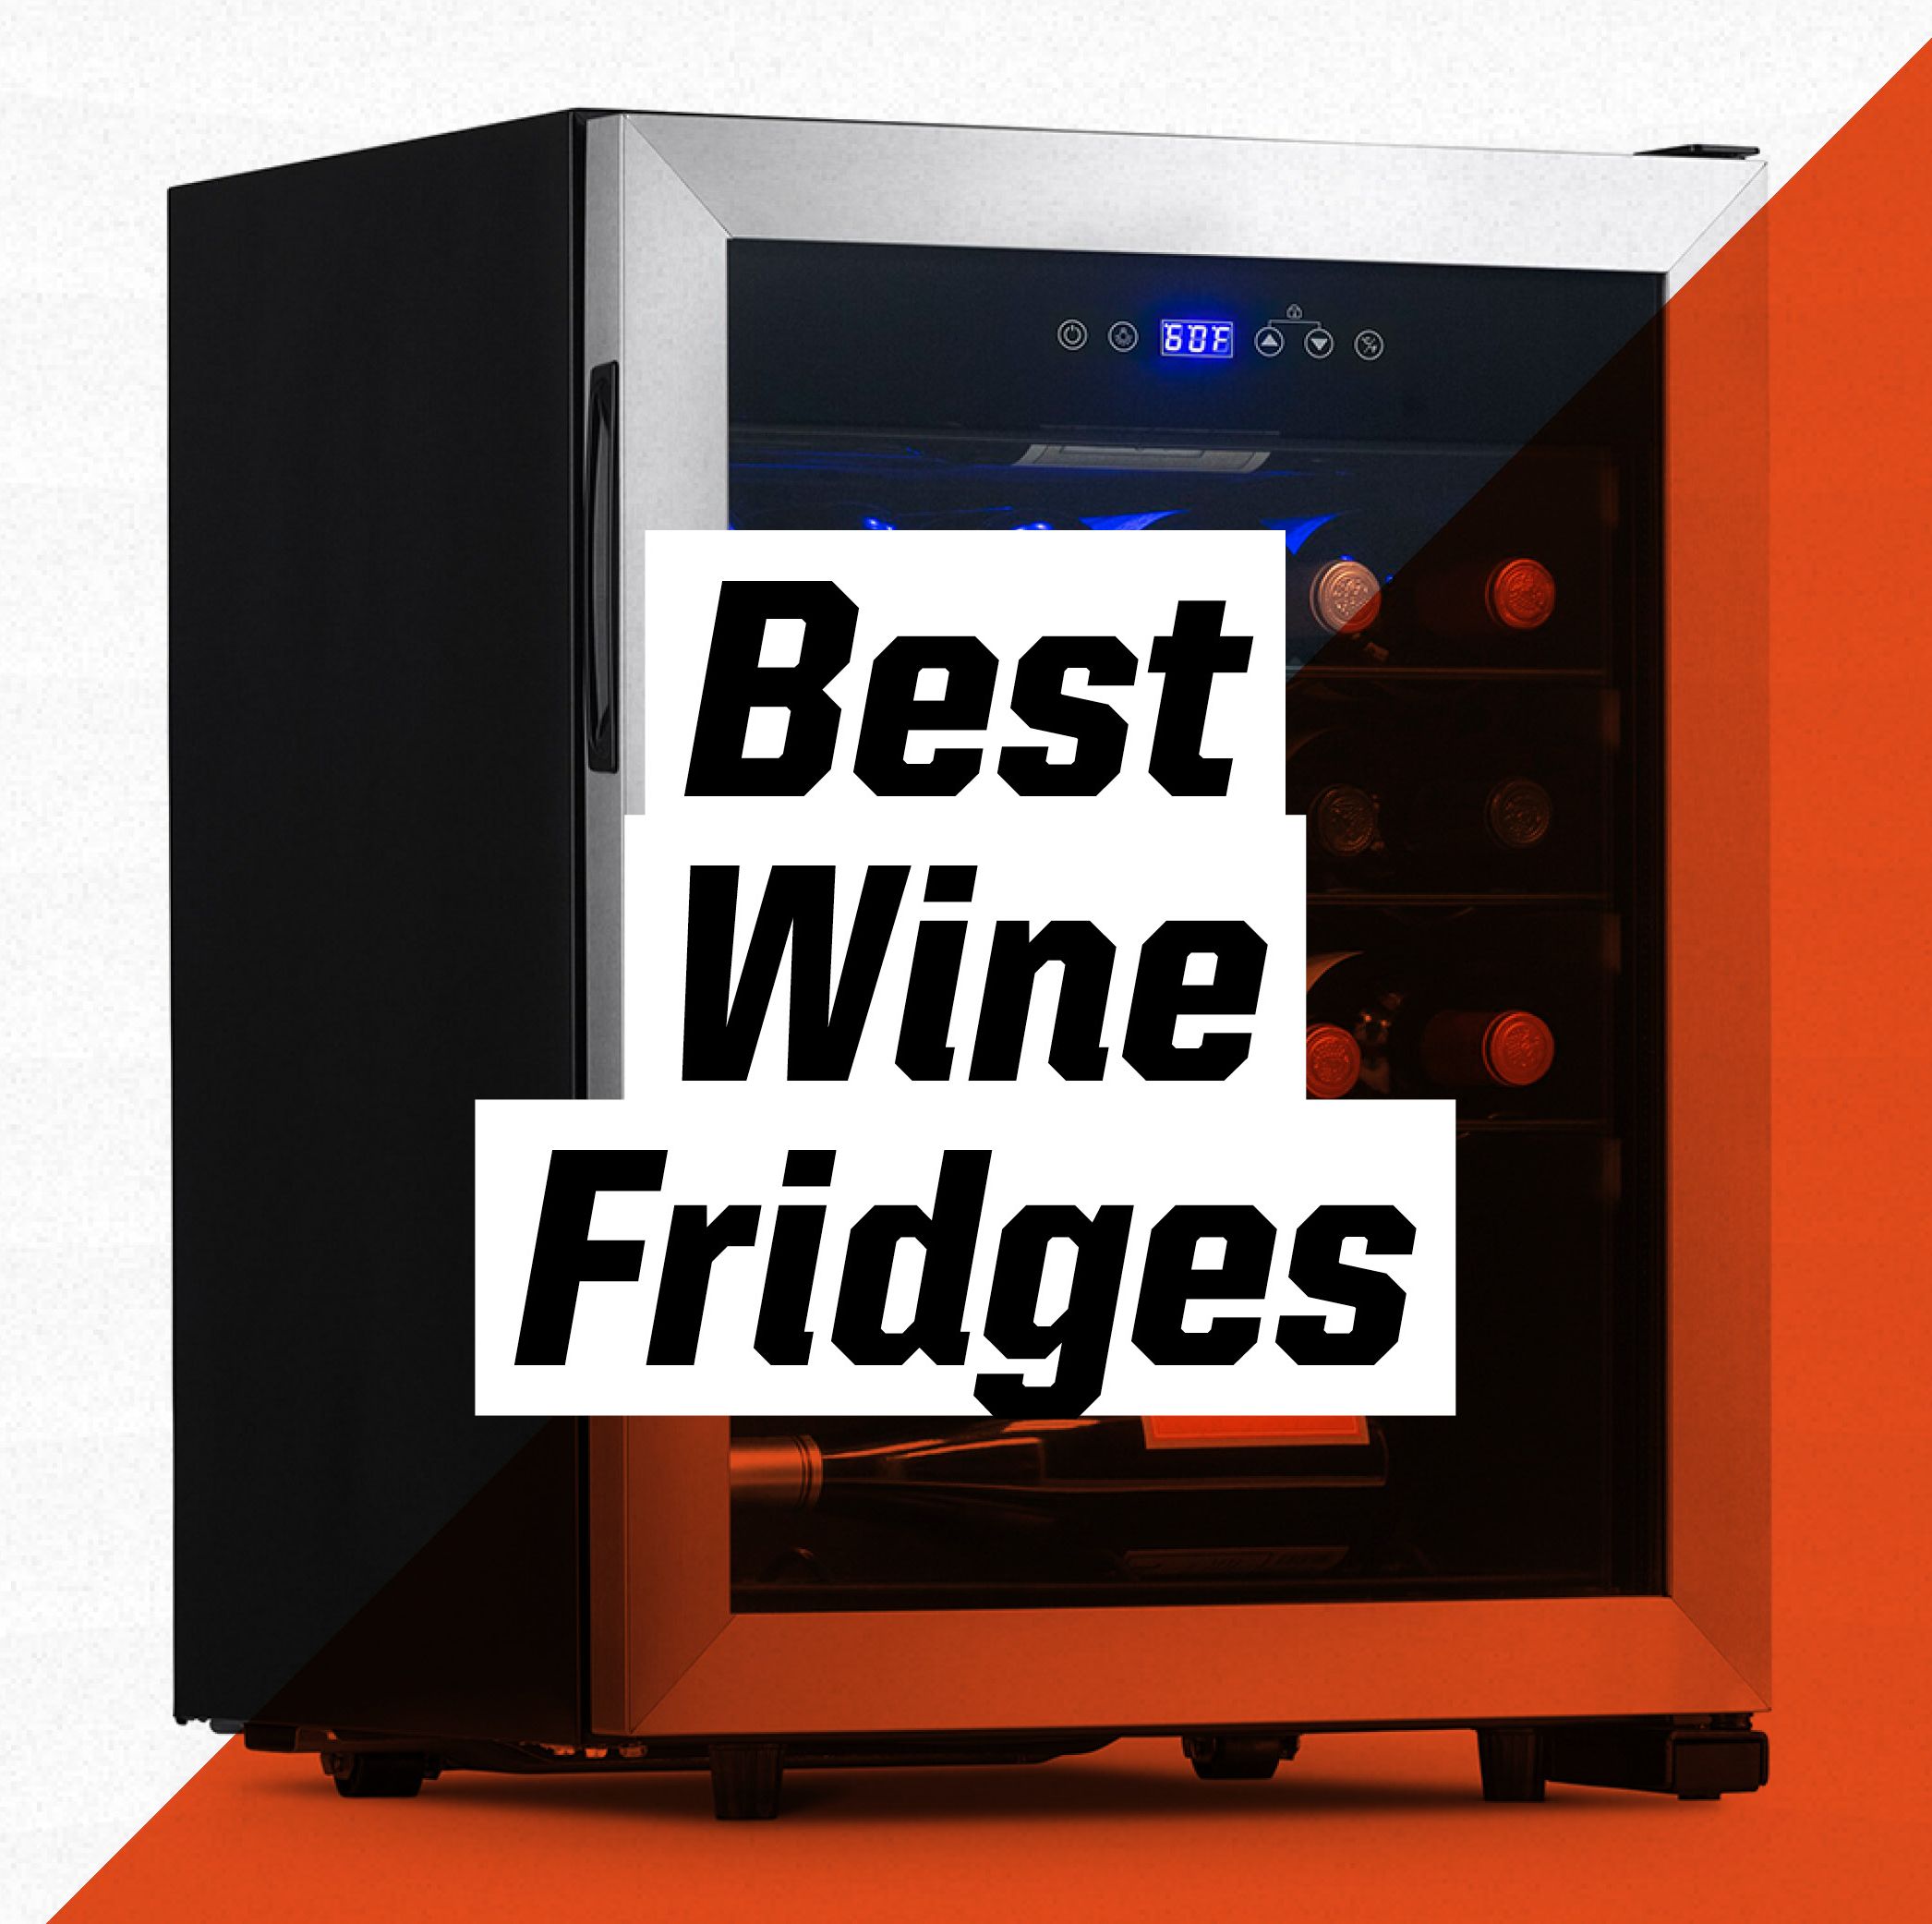 The Best Wine Fridges for the Perfect Glass of Vino